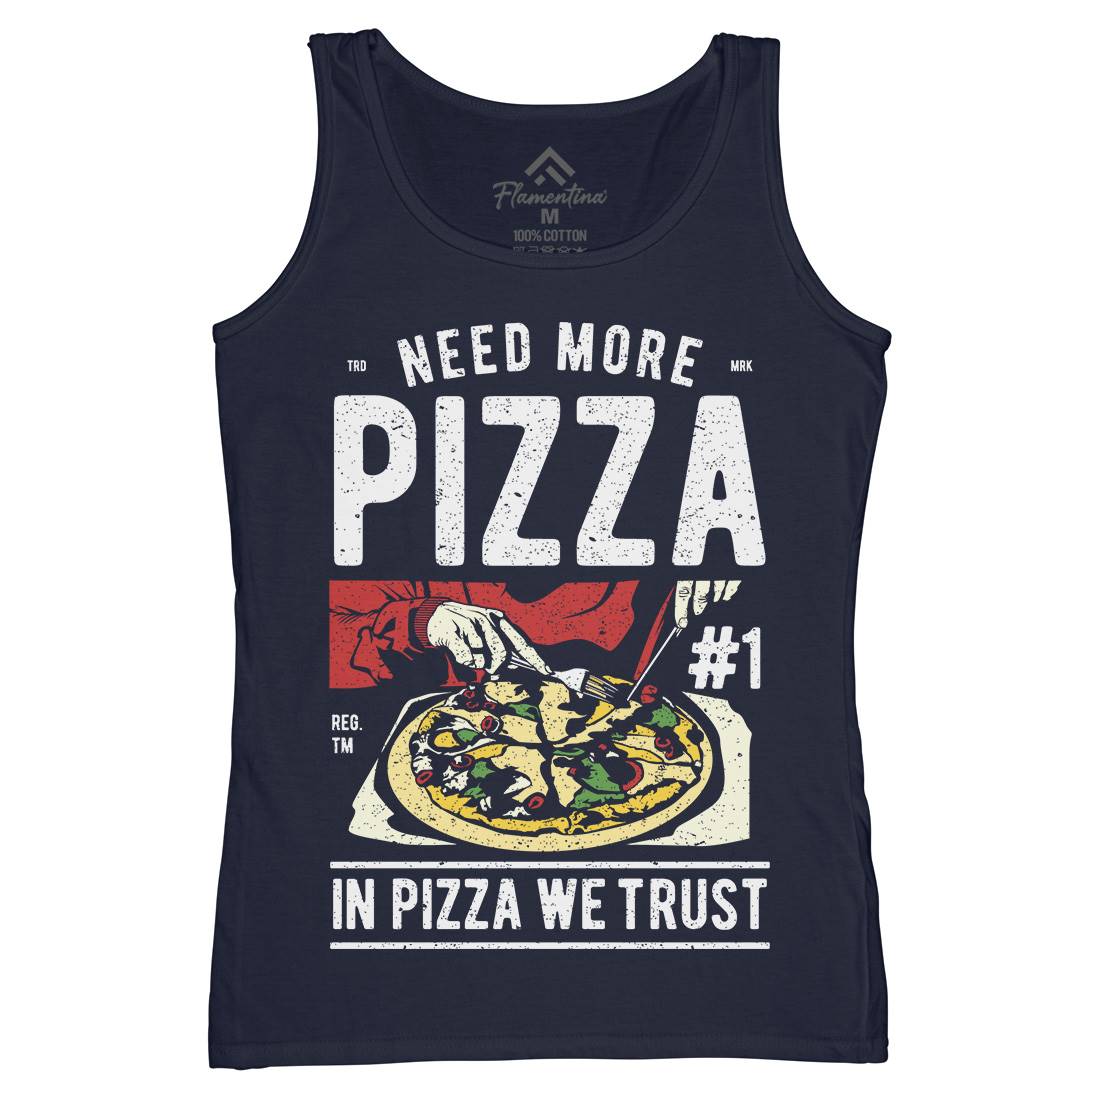 Need More Pizza Womens Organic Tank Top Vest Food A727